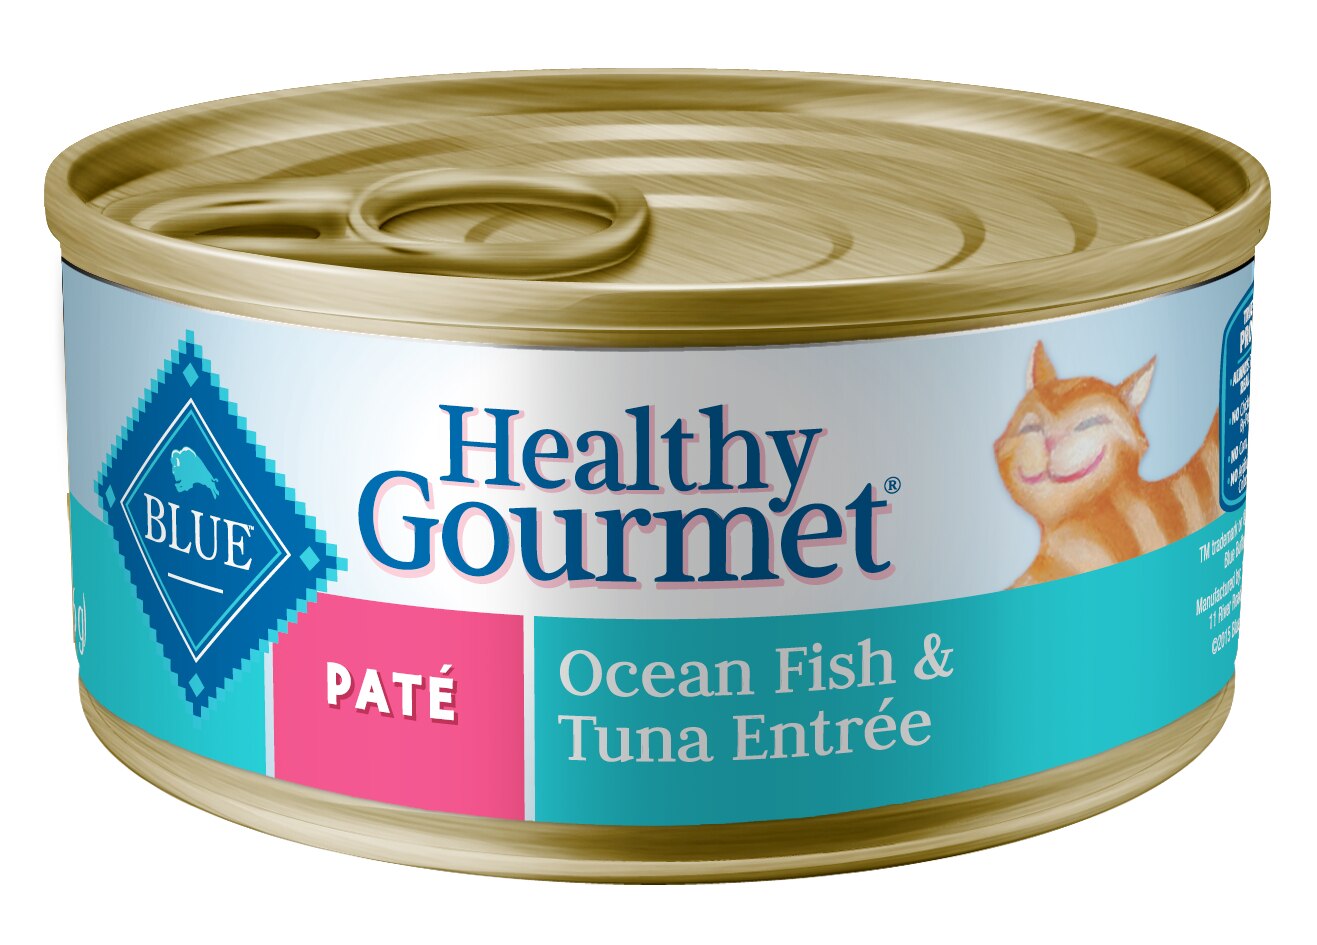 Blue Buffalo Healthy Gourmet Natural Adult Pate Wet Cat Food, Variety Pack, 12 3 oz cans, Chicken Recipe, 5.5 oz, Single